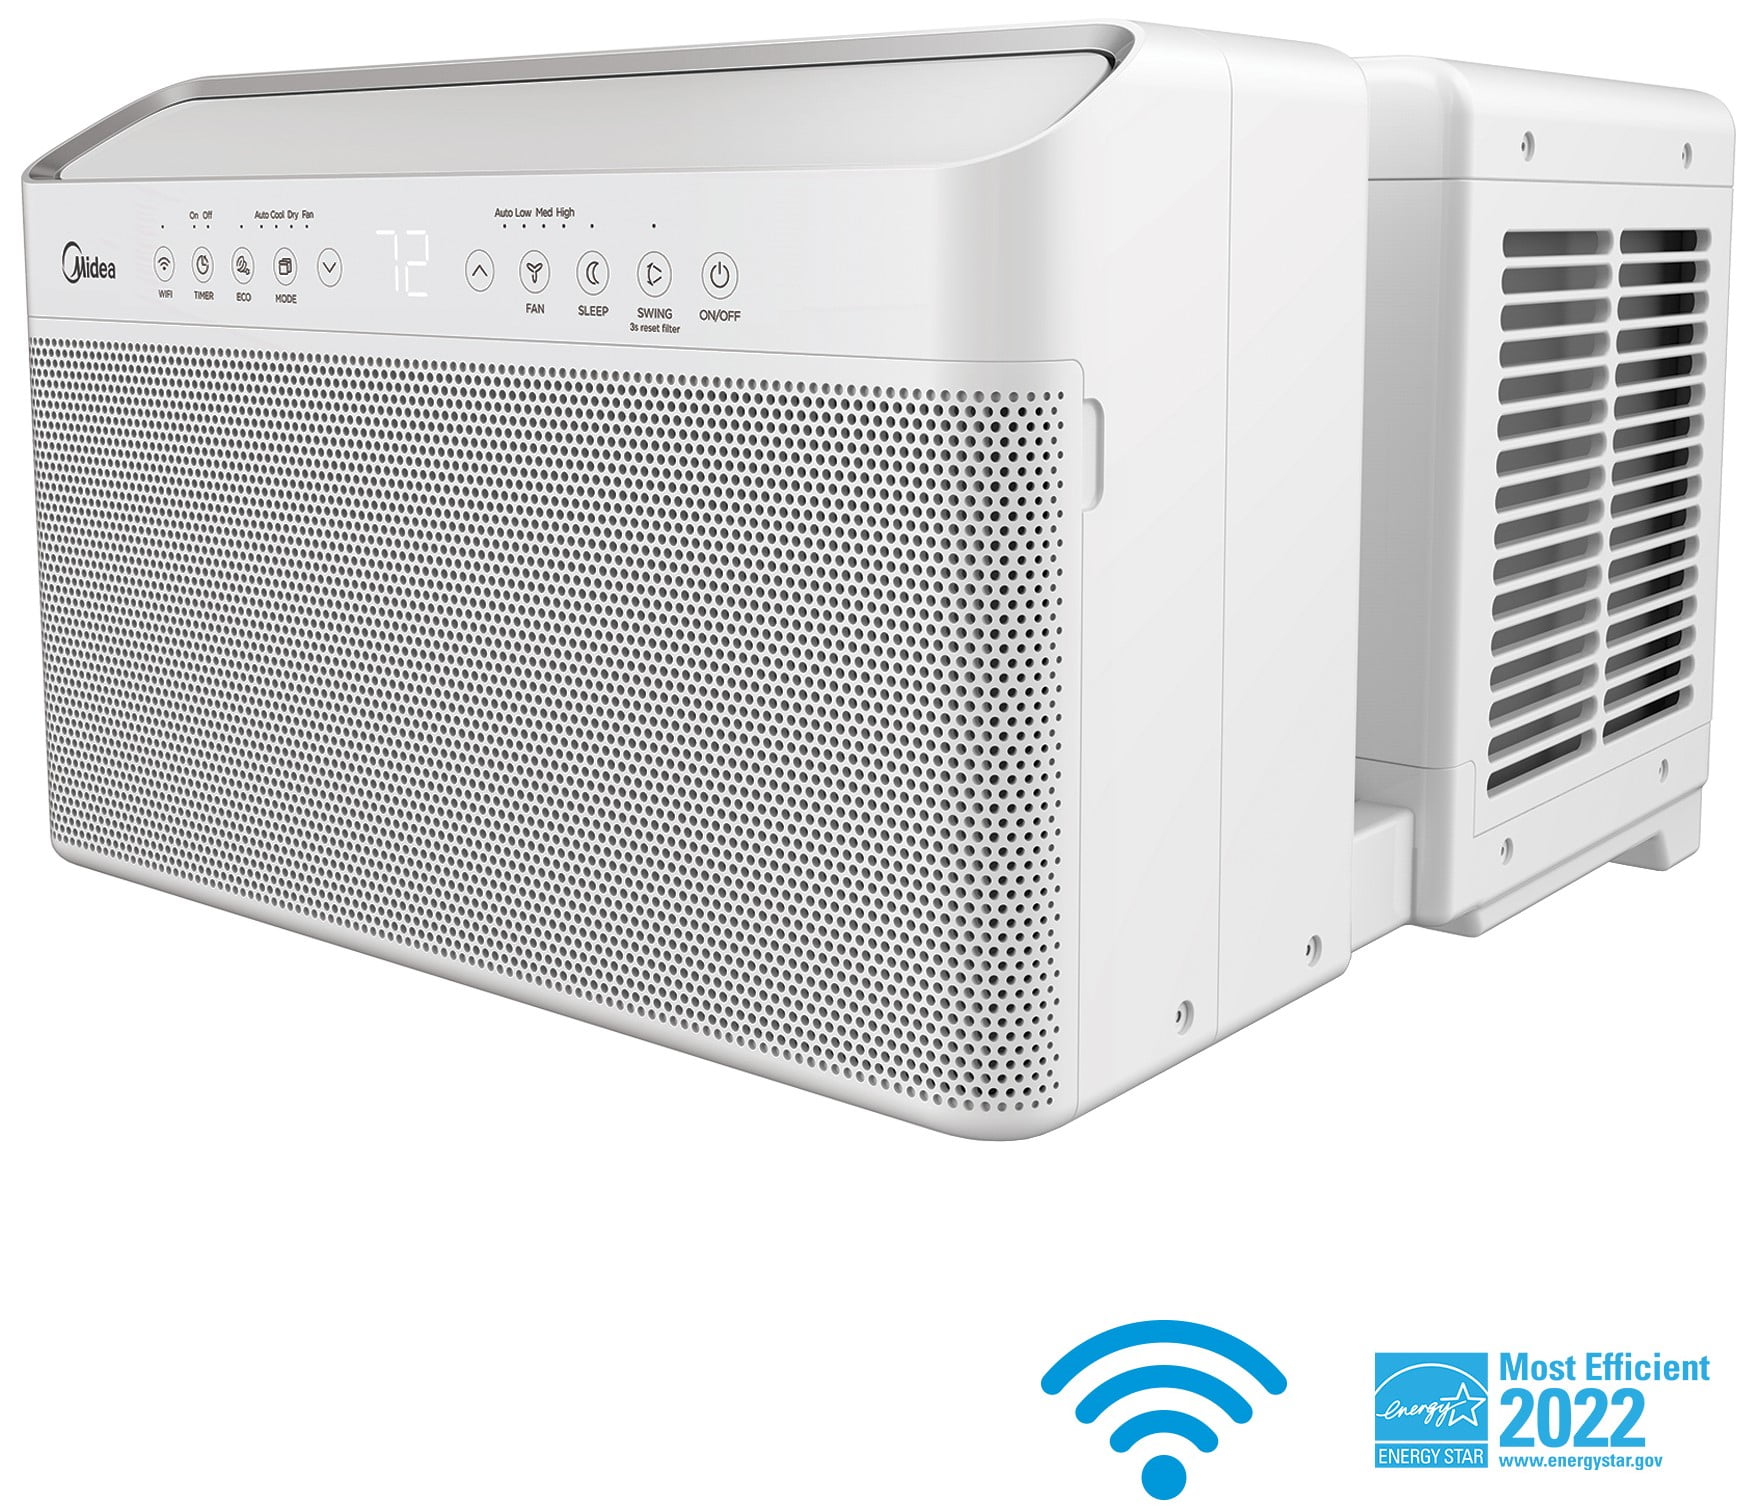  Midea 12000 BTU Mini Split AC/Heating System, 110/120V, 20.8  SEER2, Wifi Enabled Mini Split Air Conditioner, 19 db Ultra Quiet Energy  Efficient Inverter AC with Heat Pump Pre-Charged, Works with Alexa 